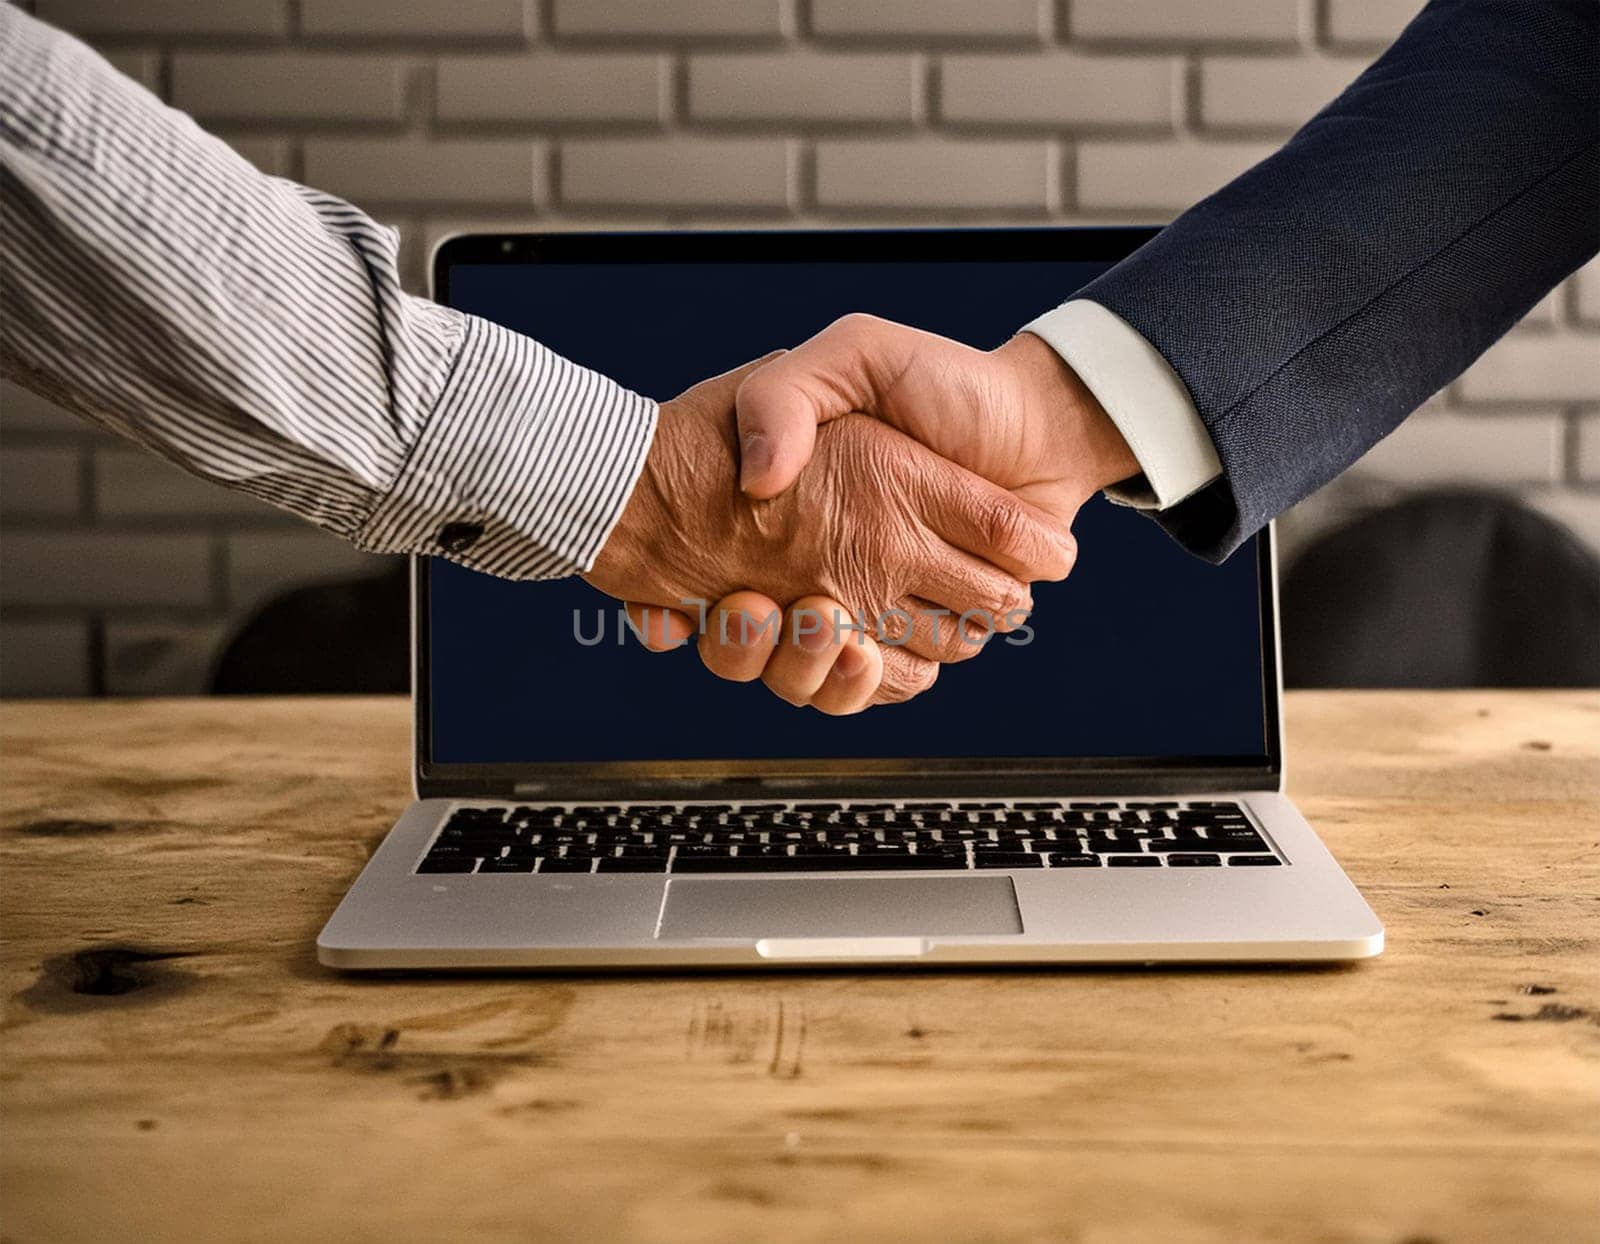 Handshake concept between a businessman and a person from the laptop screen.